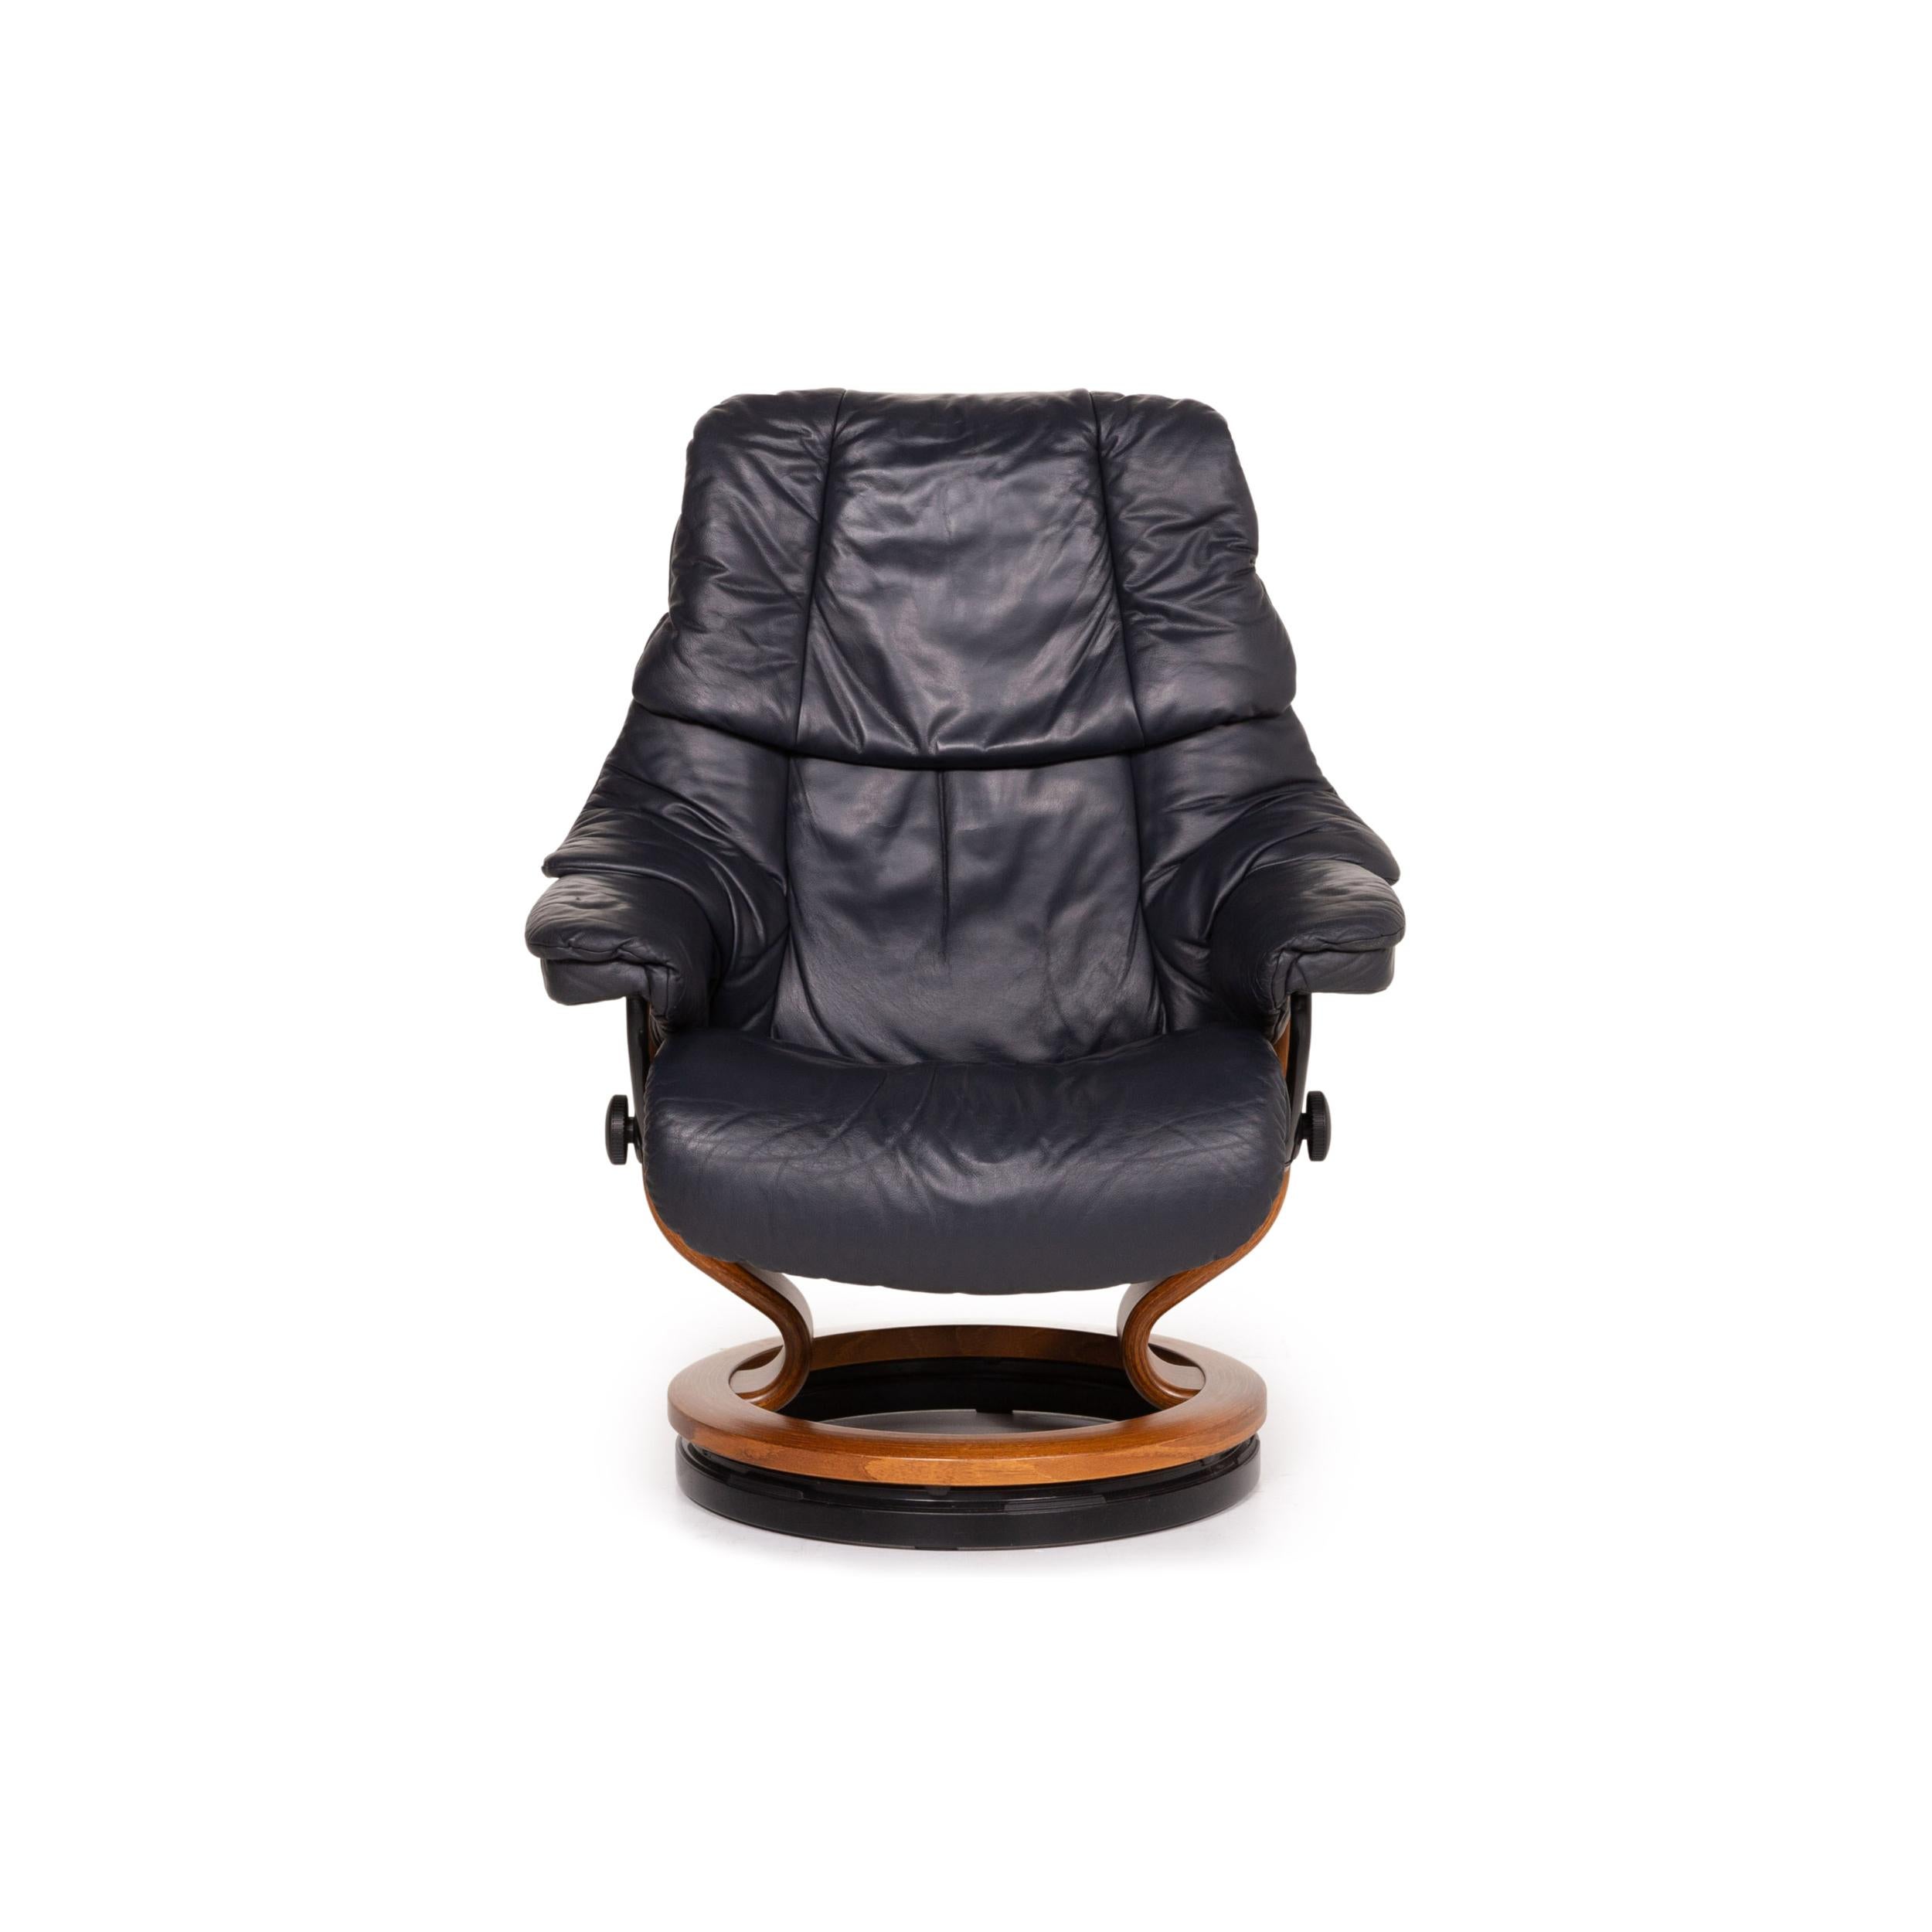 Stressless Reno Leather Armchair Incl. Stool Dark Blue Blue Relaxation Function 4